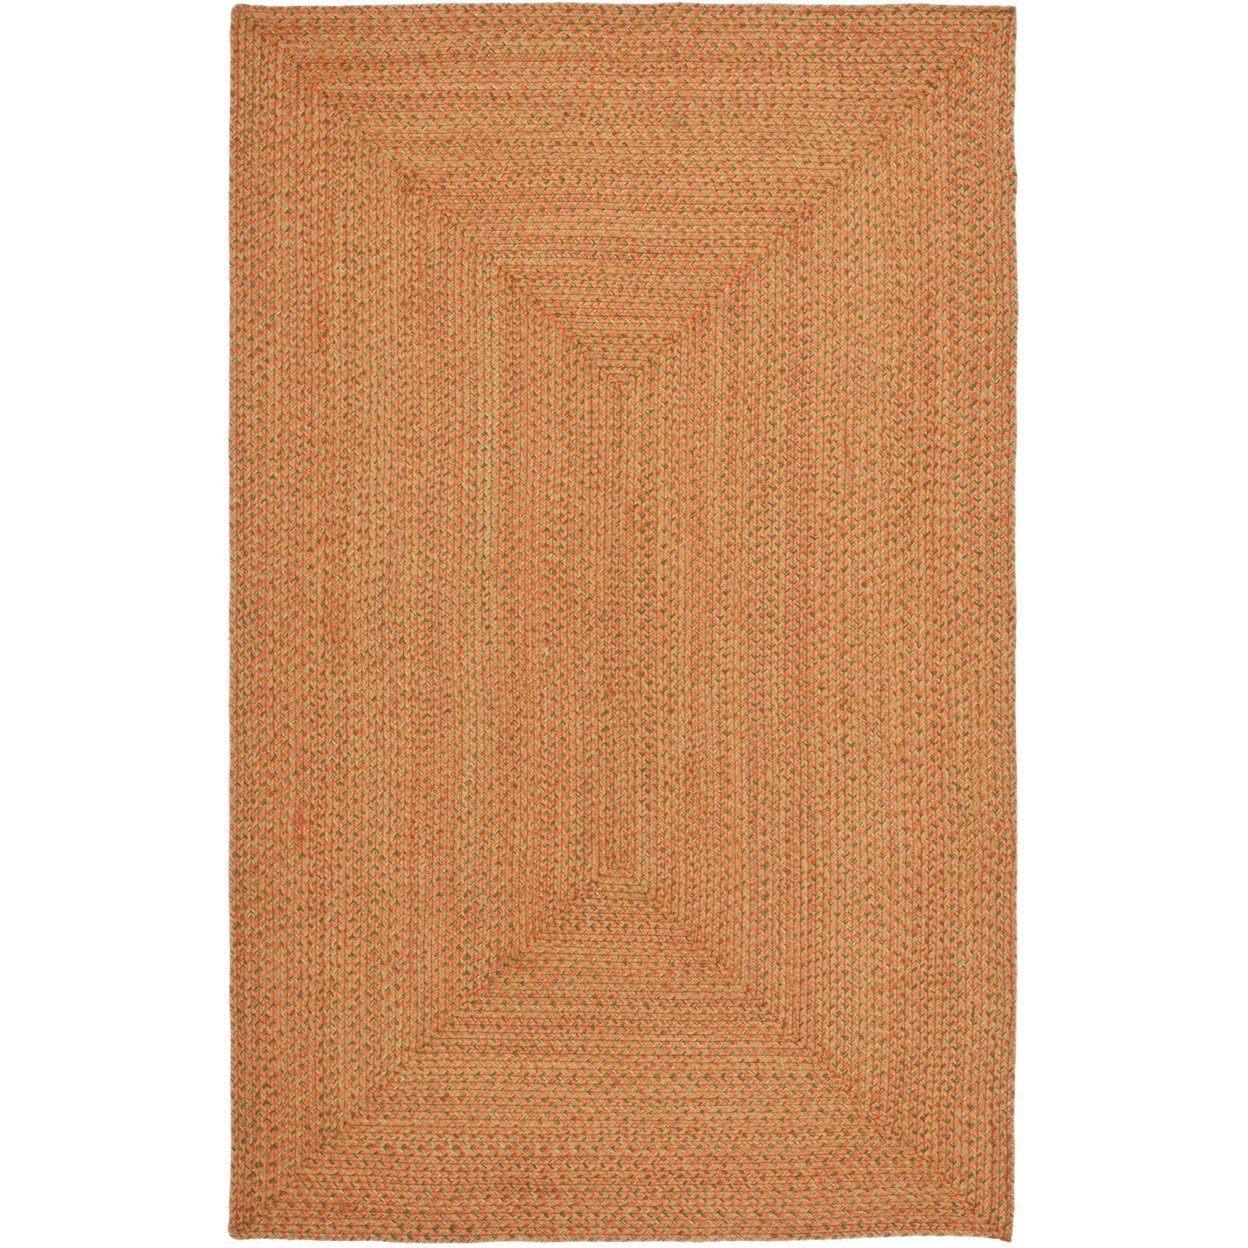 SAFAVIEH Braided Collection BRD166A Handwoven Multi Rug - 5' X 8' Oval